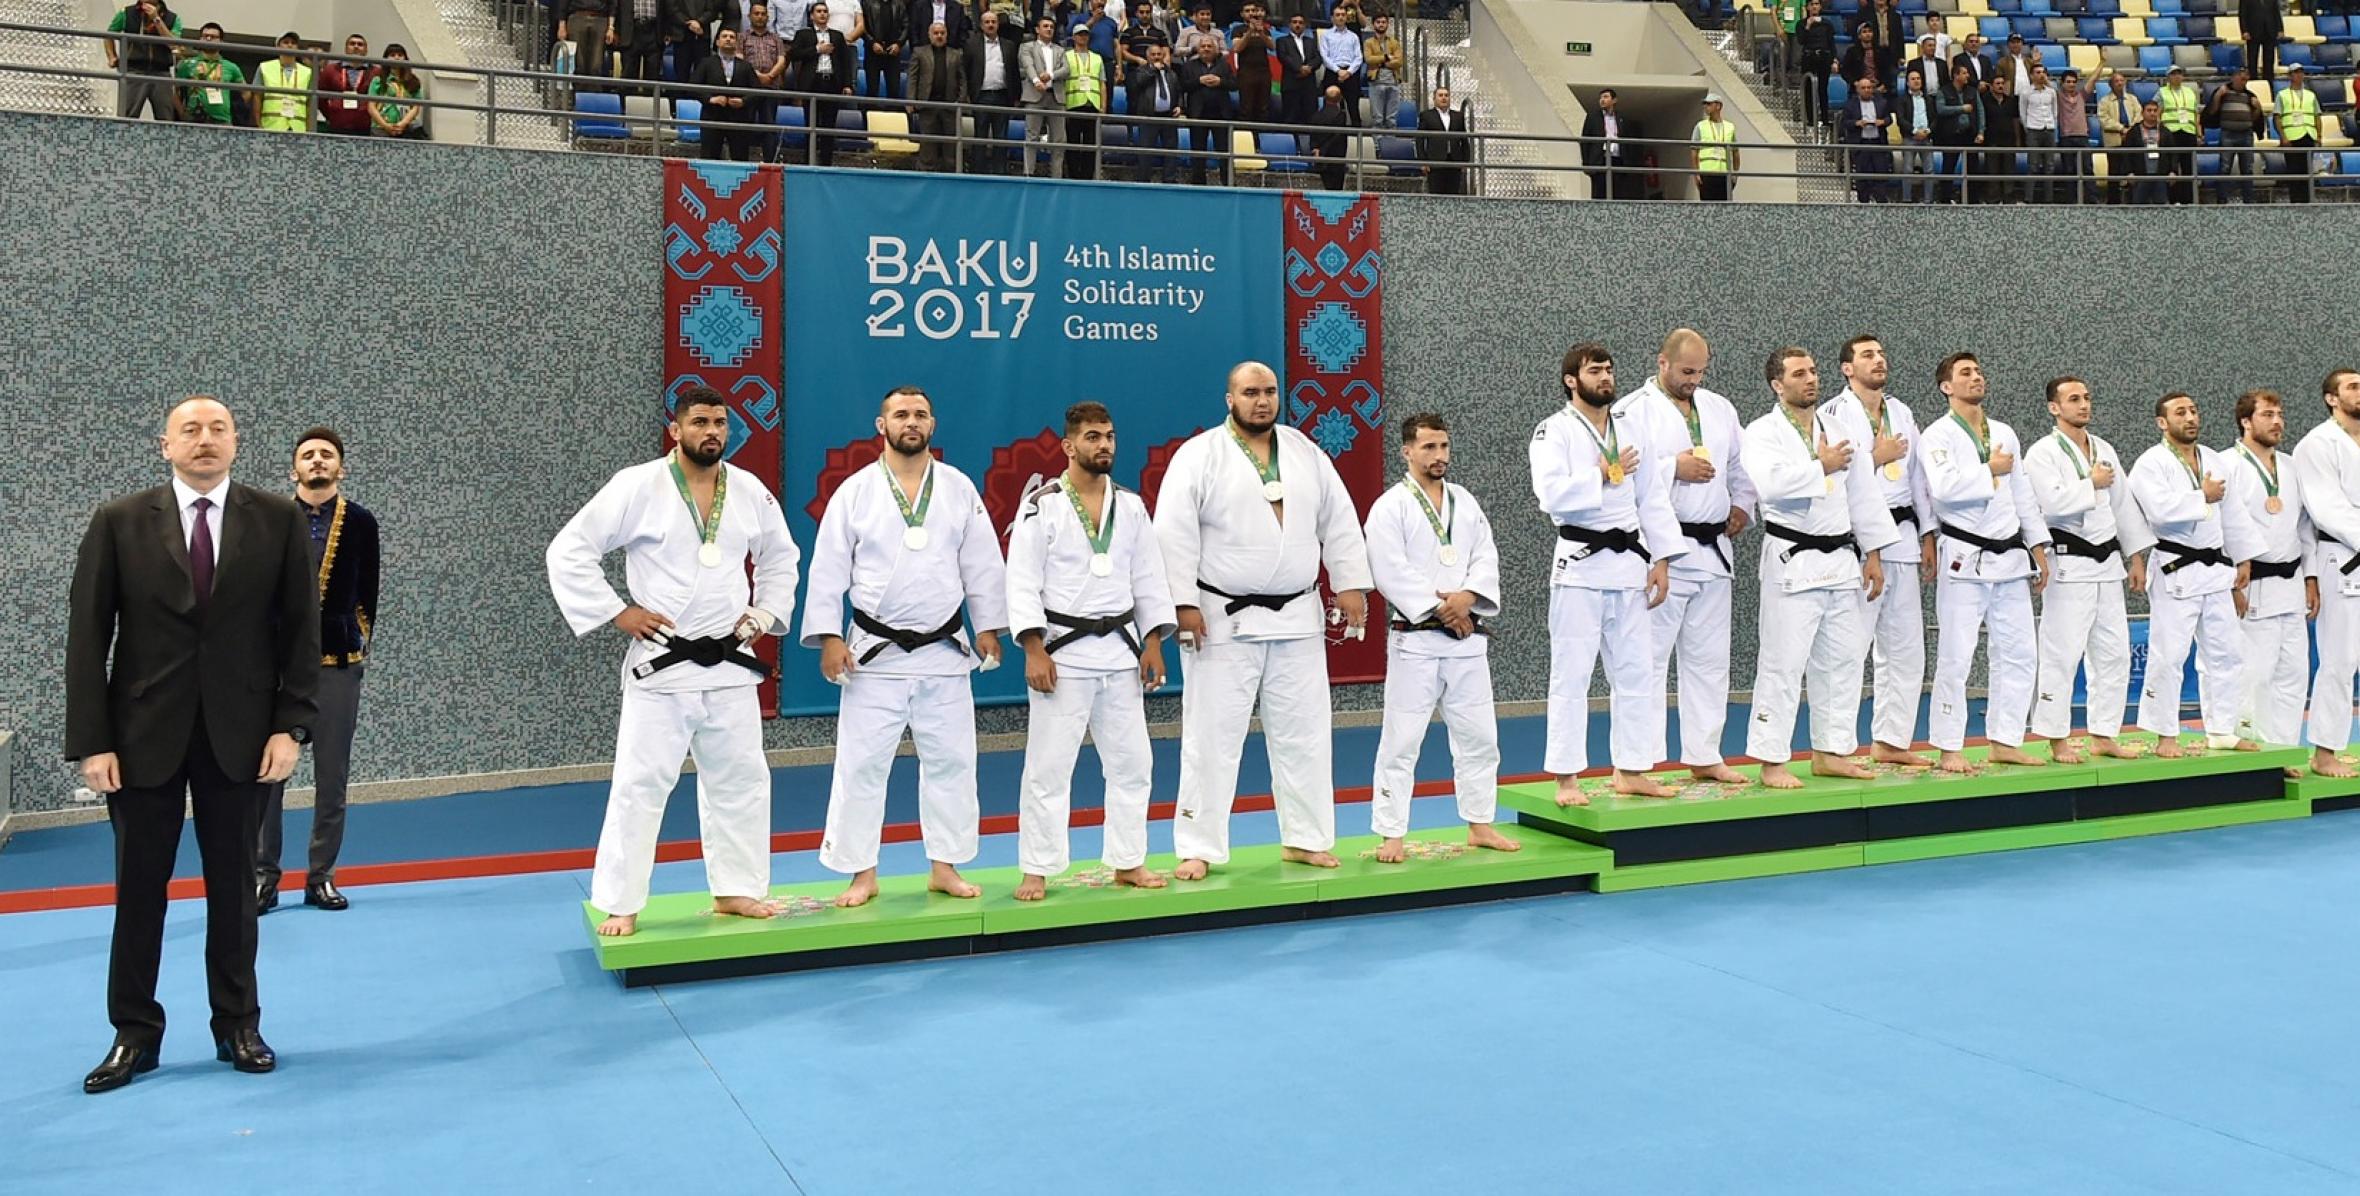 Ilham Aliyev awarded the winners of the judo competitions